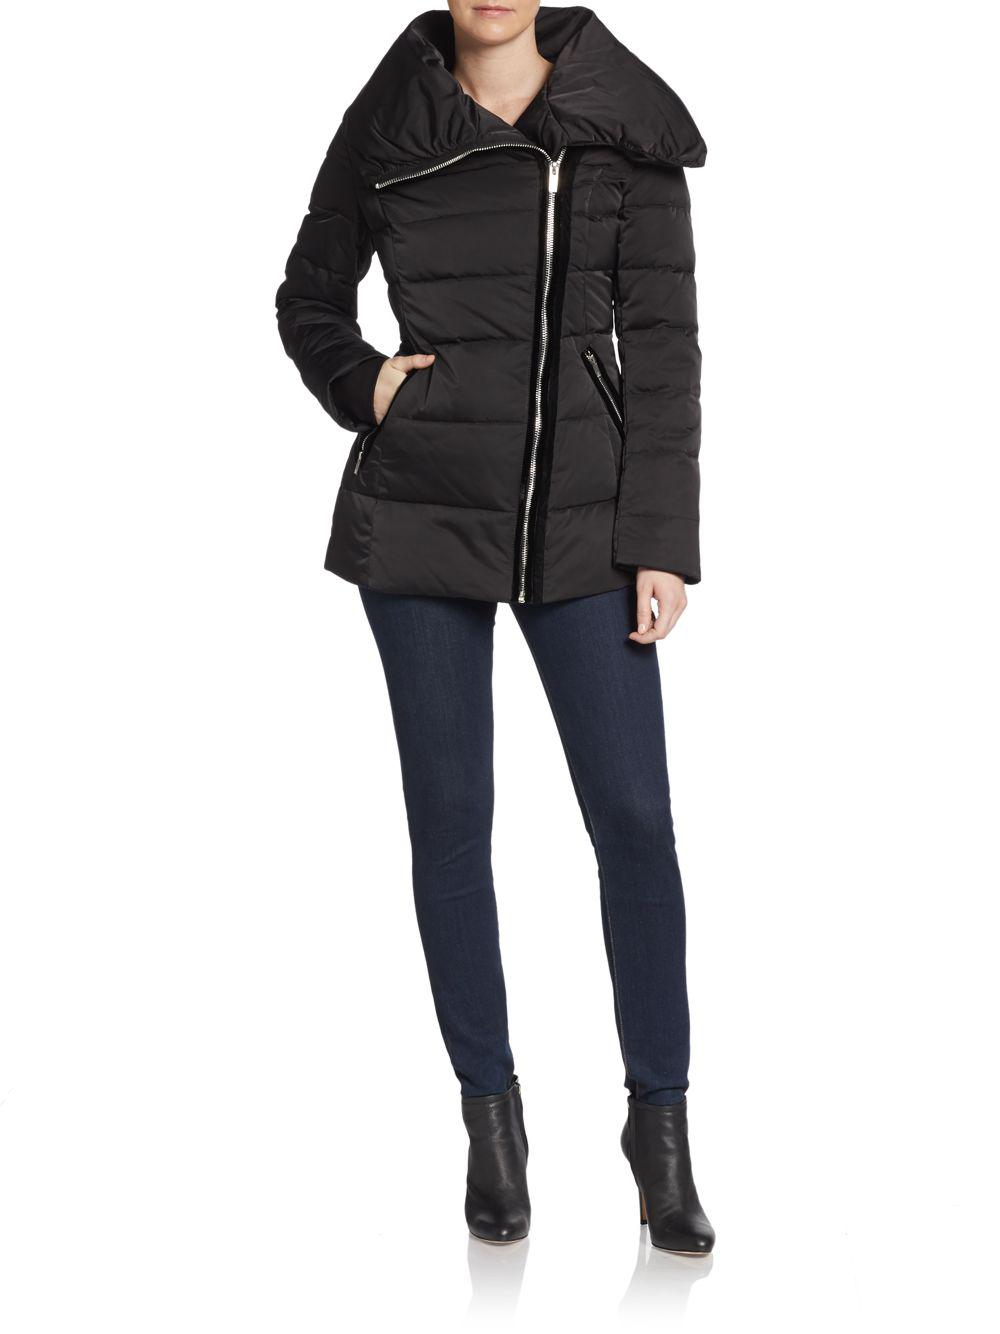 Vera Wang Asymmetrical Quilted Puffer Jacket in Black | Lyst